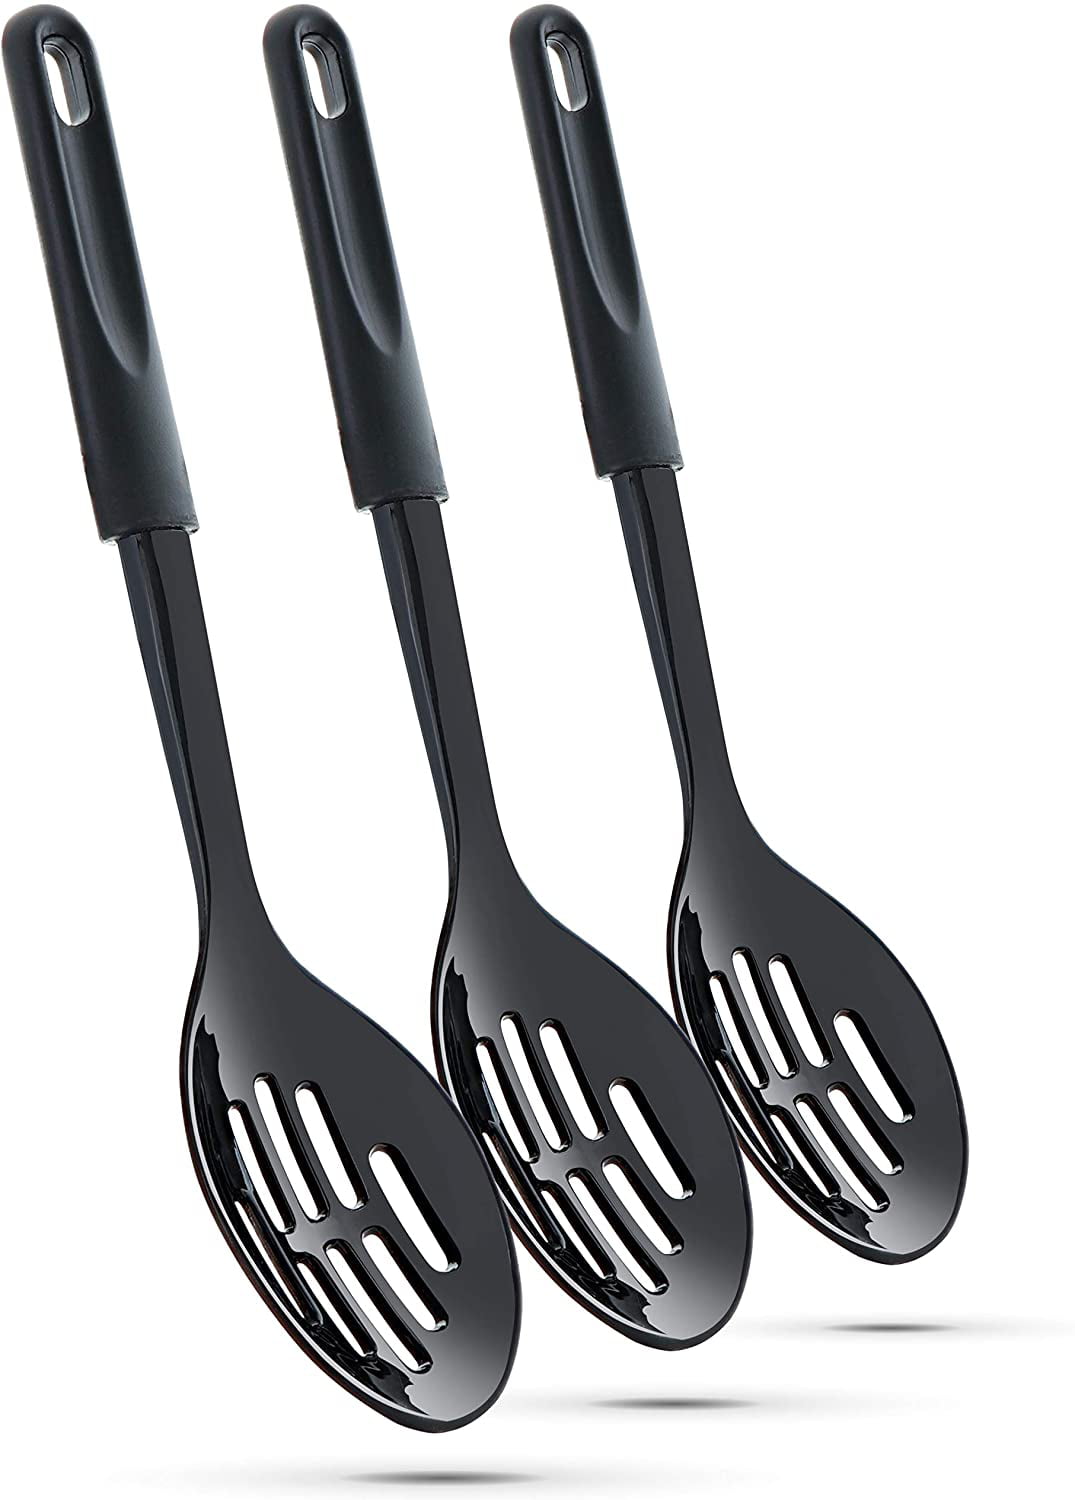 Ram Pro Kitchen Slotted Spoons for Cooking Made of Heat Resistant Nylon with Plastic Handle Ideal for use with Non-Stick Pots and Pans Pack of 3 Black